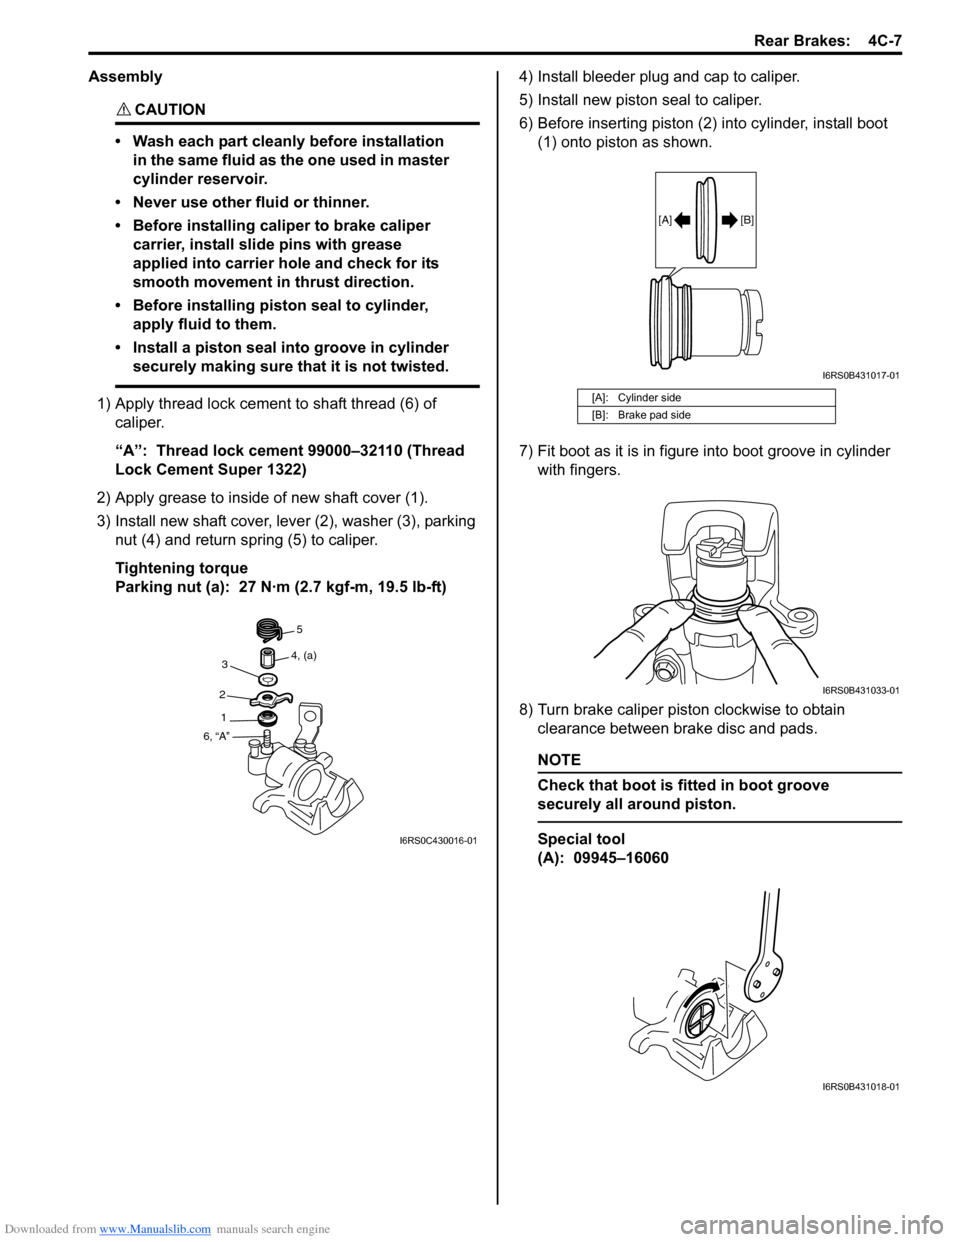 SUZUKI SWIFT 2004 2.G Service Workshop Manual Downloaded from www.Manualslib.com manuals search engine Rear Brakes:  4C-7
Assembly
CAUTION! 
• Wash each part cleanly before installation in the same fluid as the one used in master 
cylinder rese